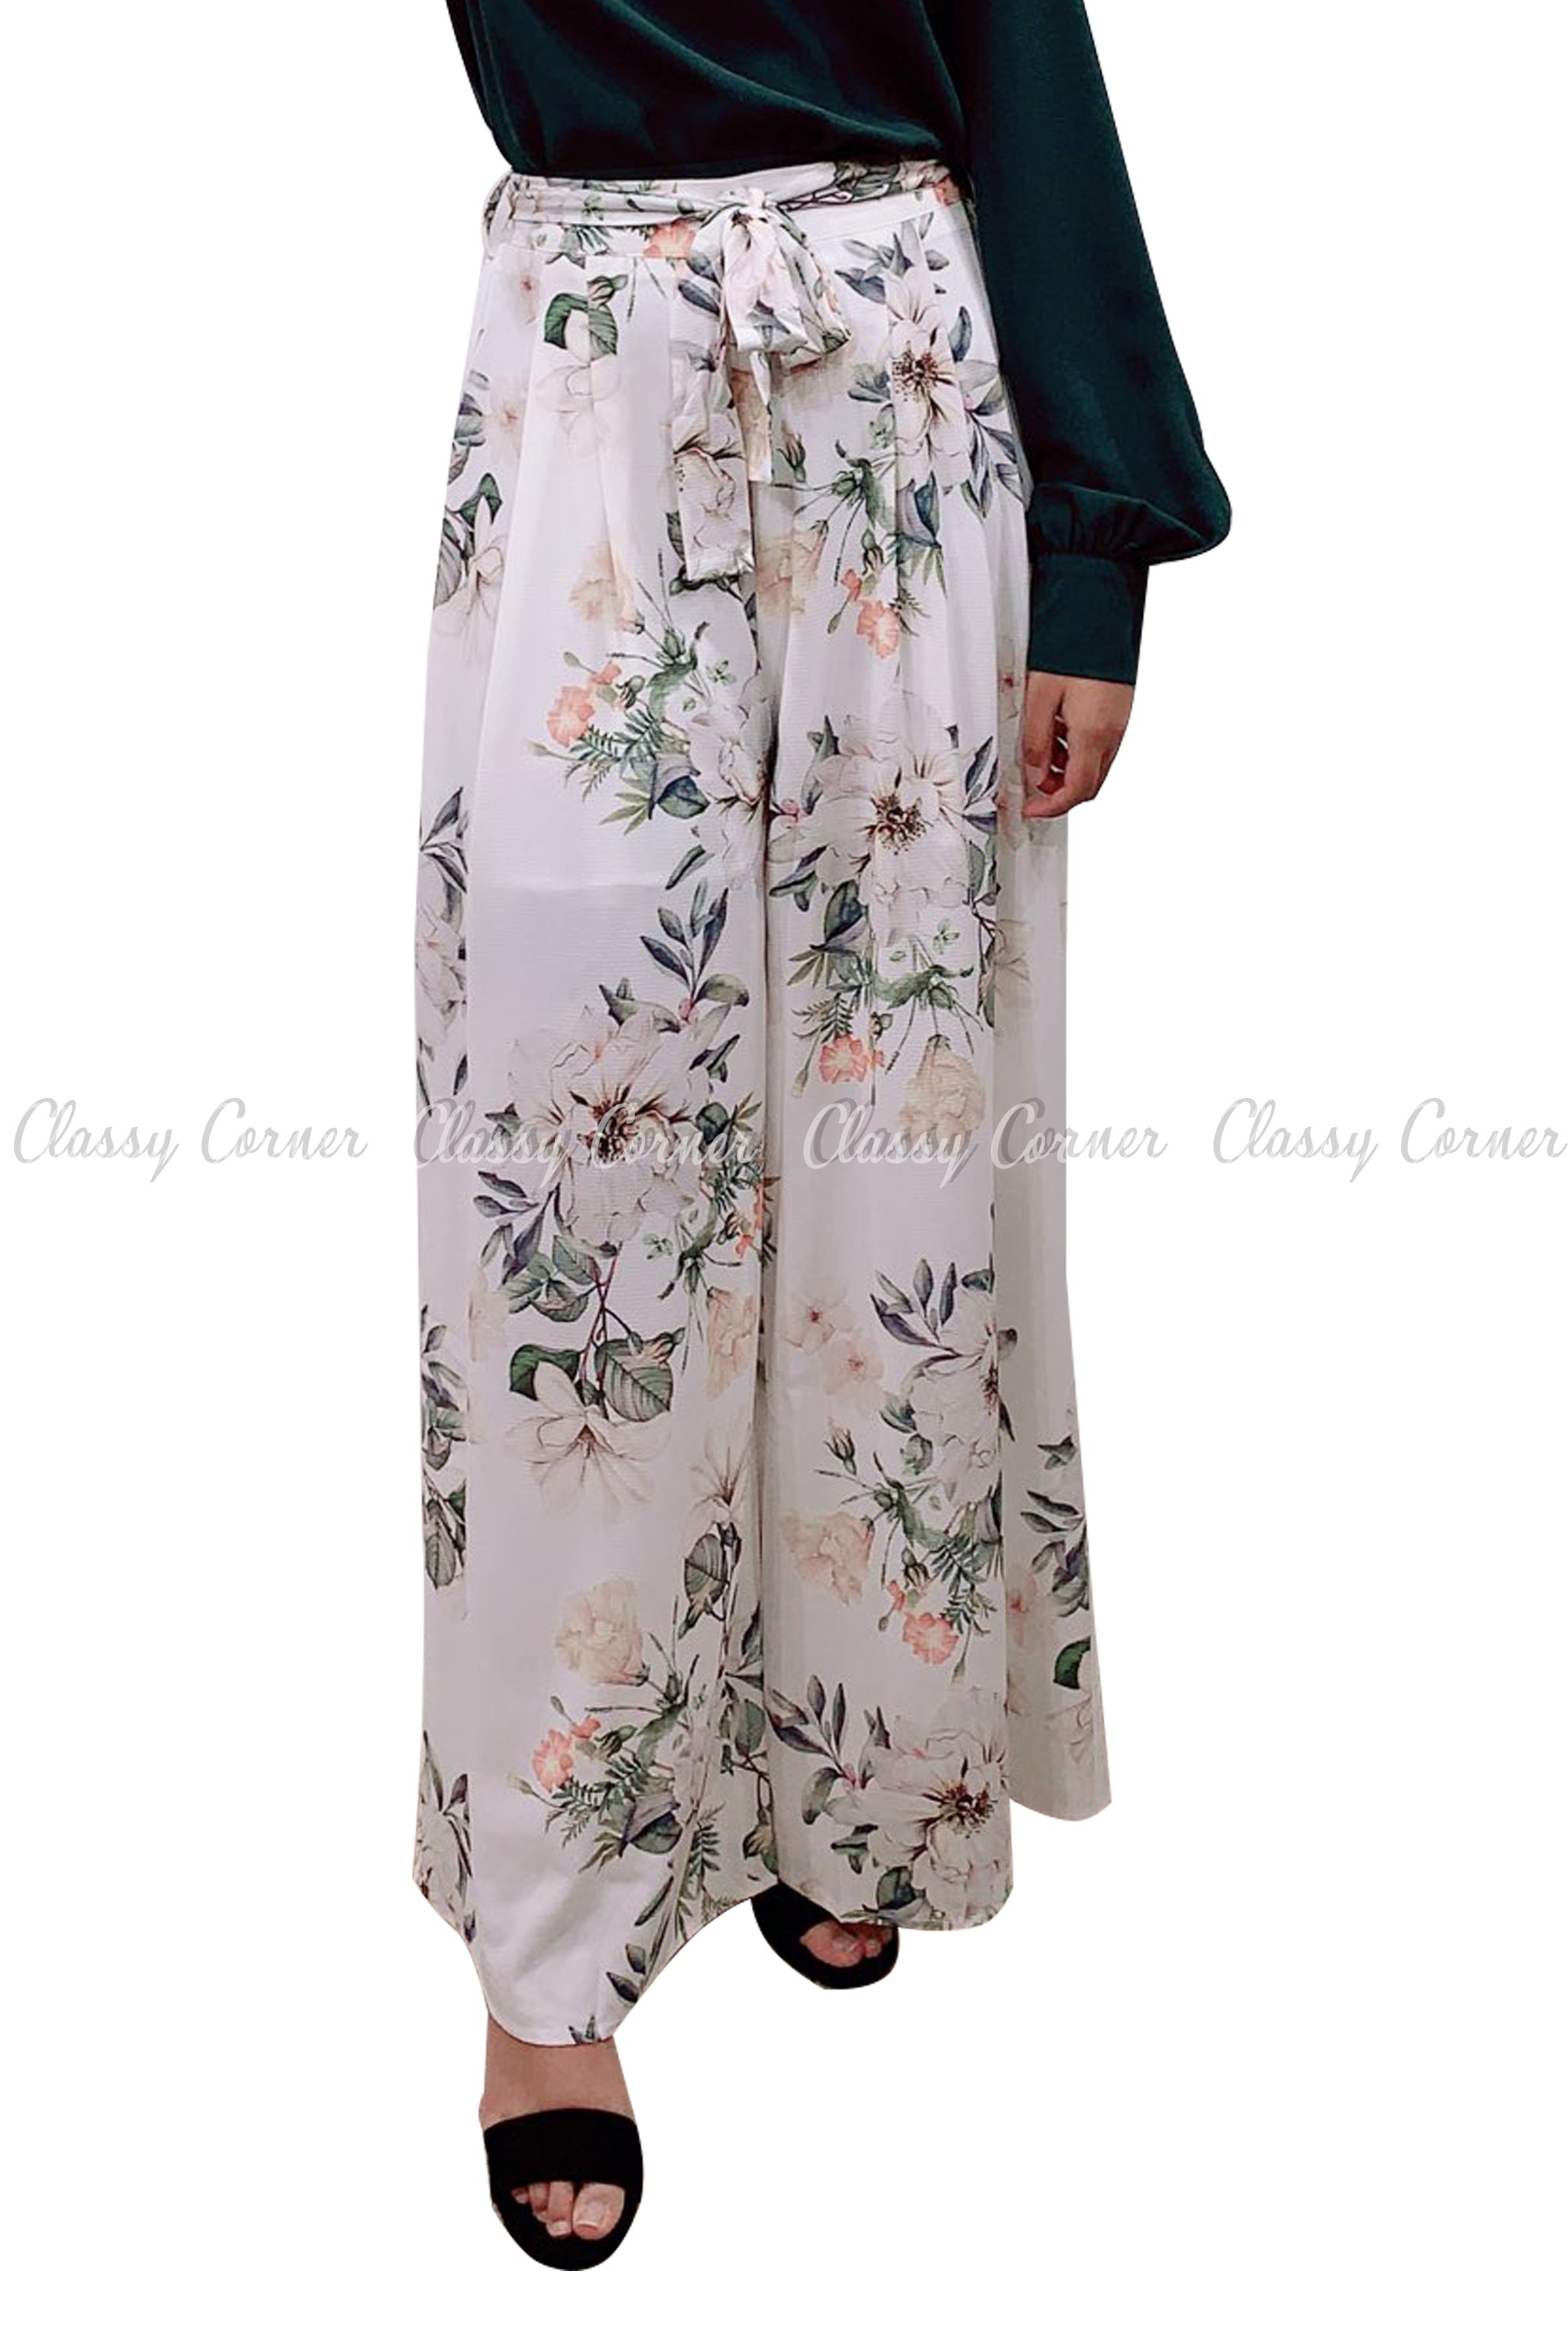 Tropical Leafy Floral Printed White Elegant Pants - full front view